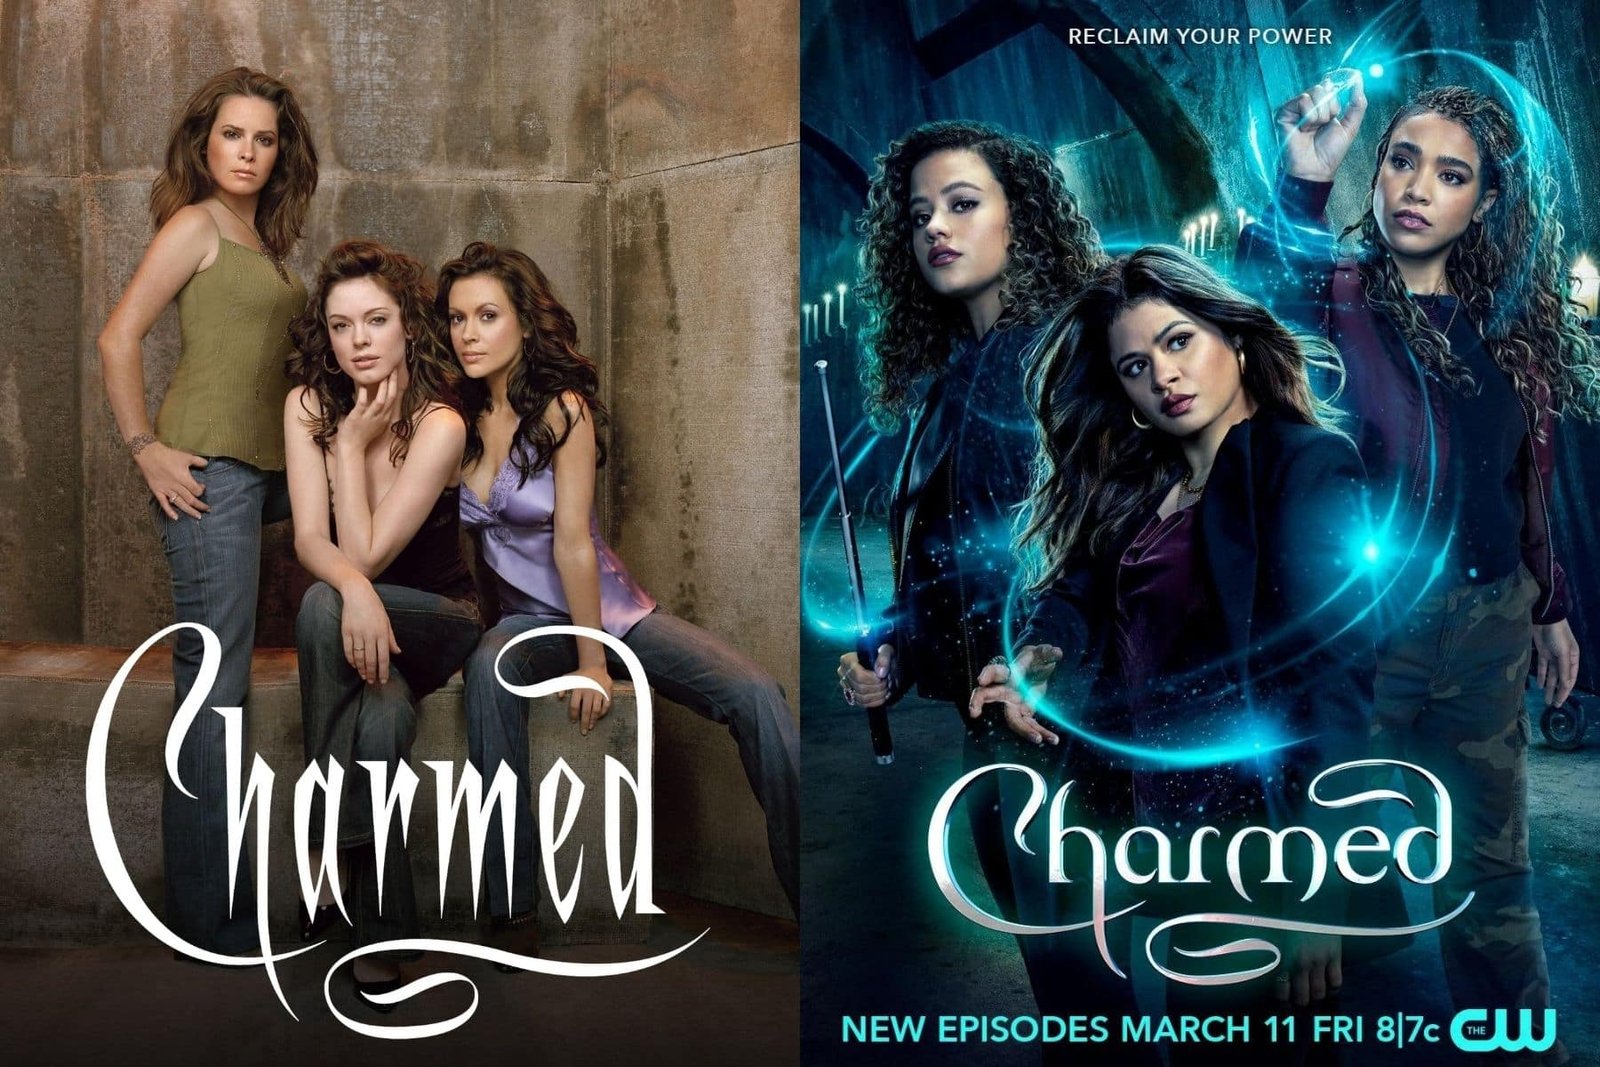 How is Charmed 2018 Different than Charmed 1998?